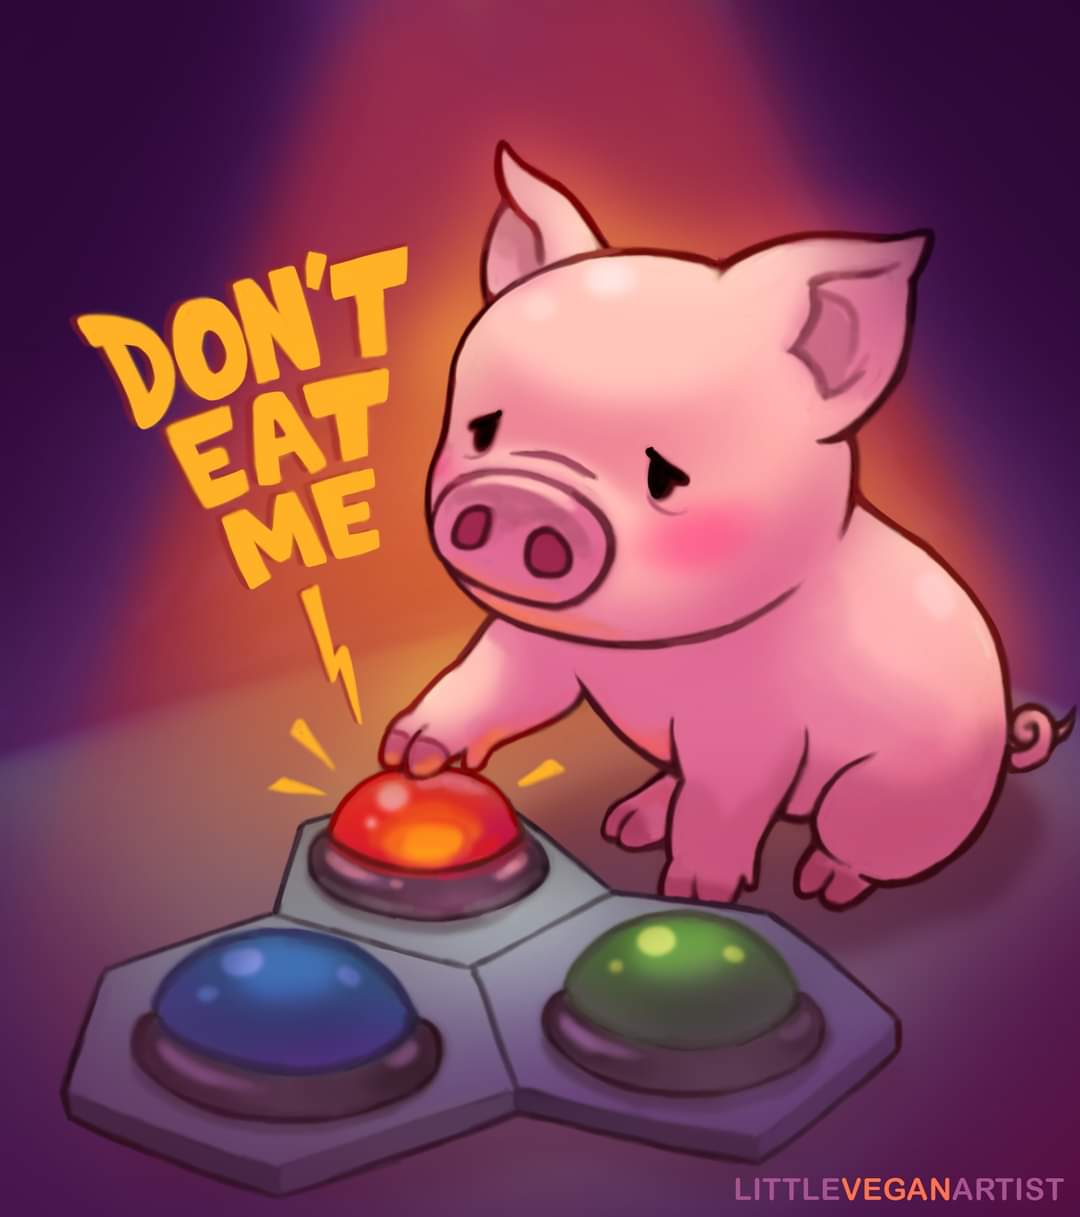 Picture of a cartoon pig pressing a talk button that says 'don't eat me'.